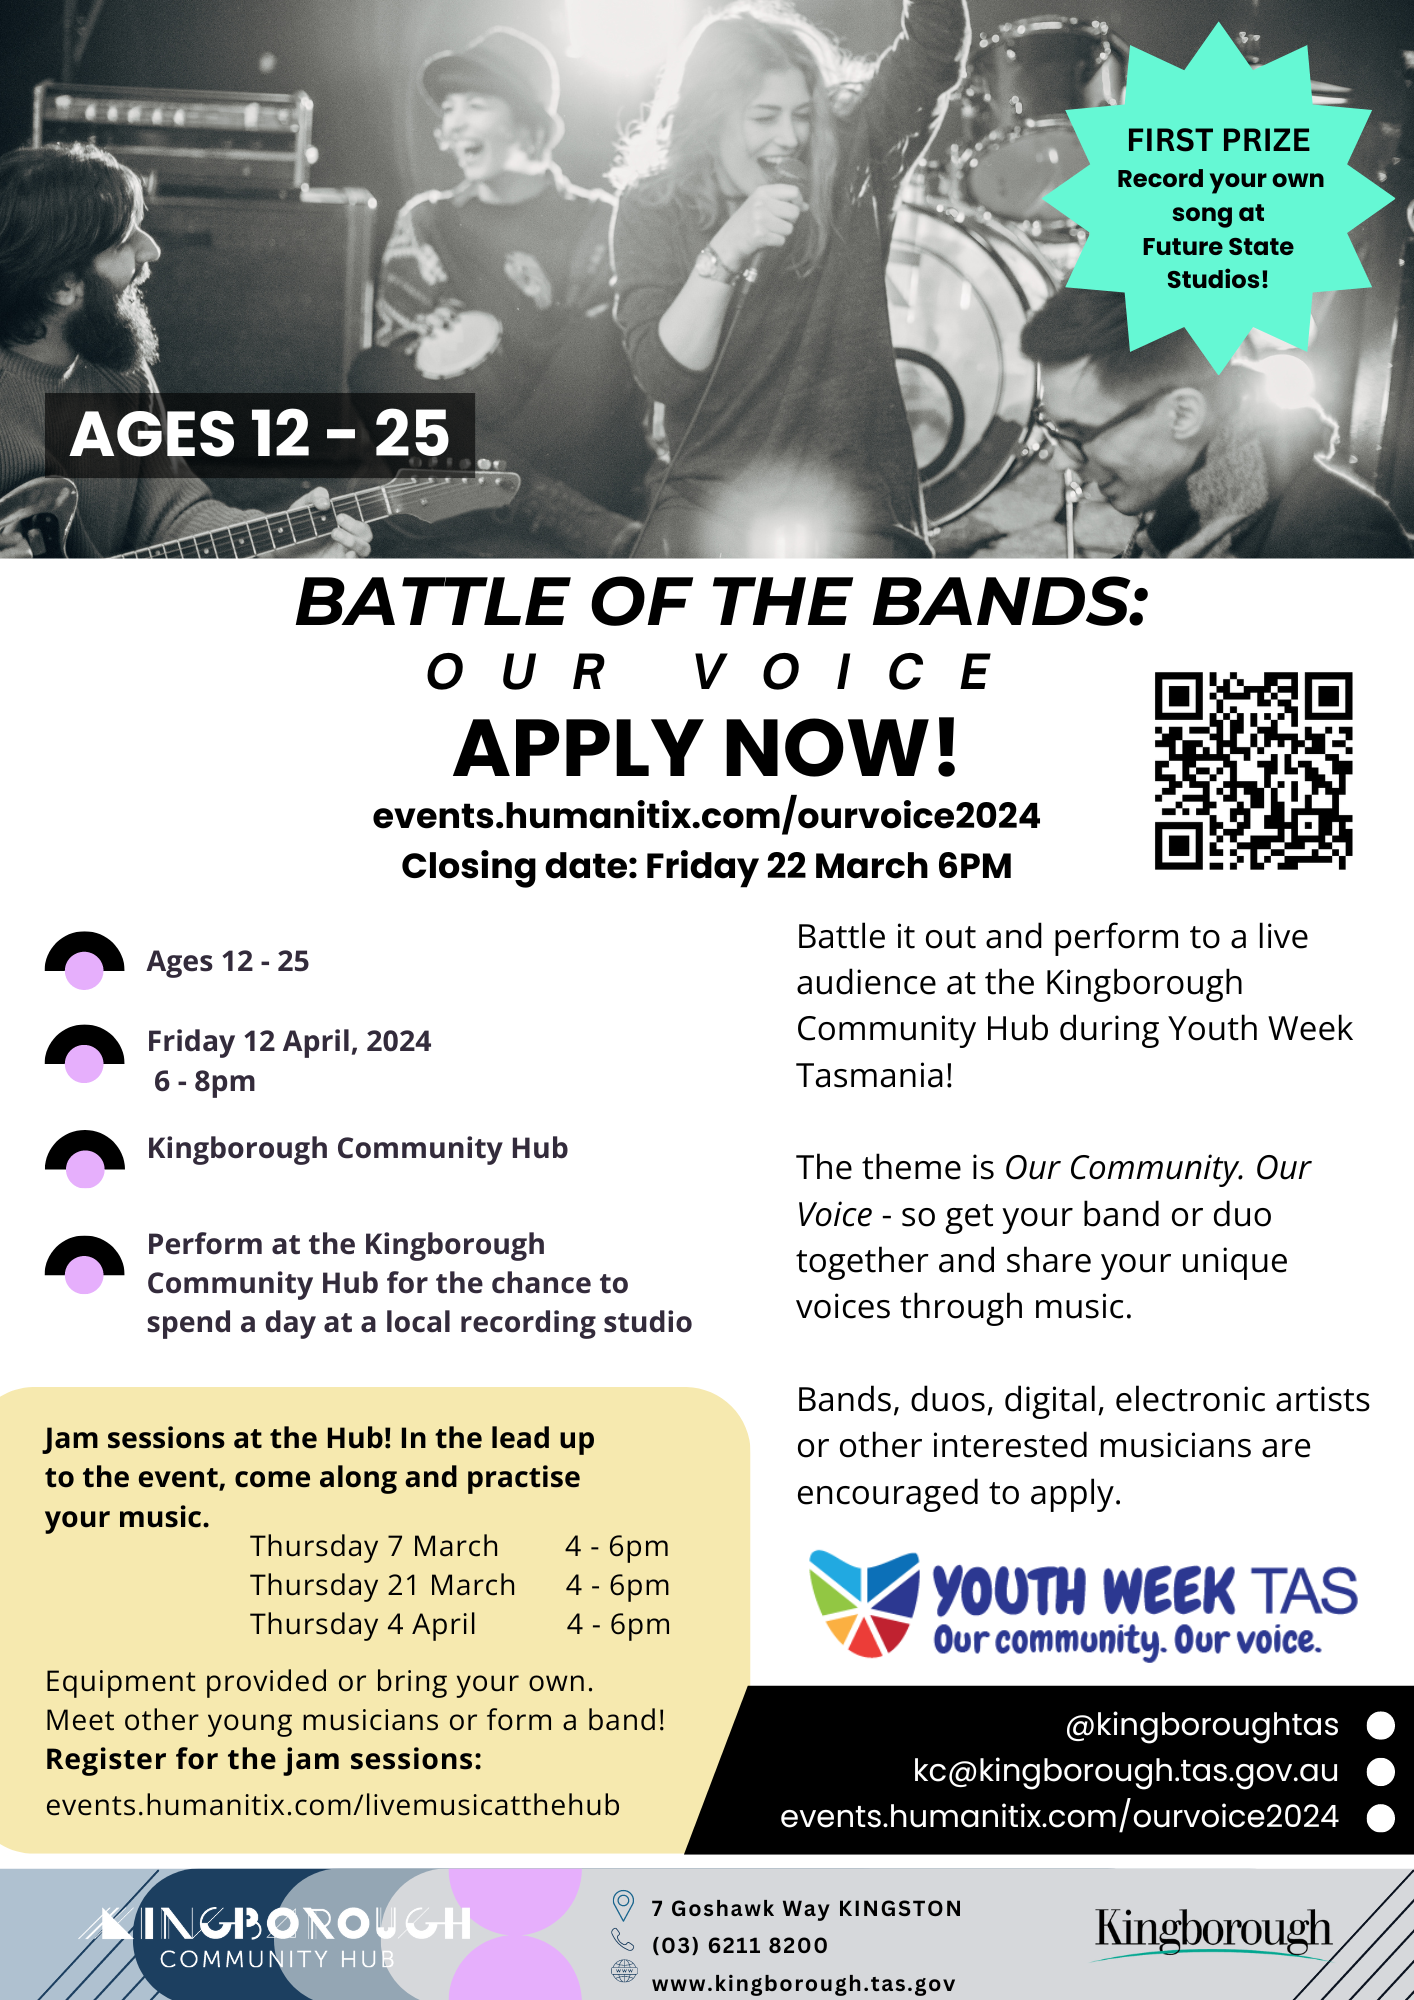 A poster promoting Kingborough Council's "Battle of the Bands" event